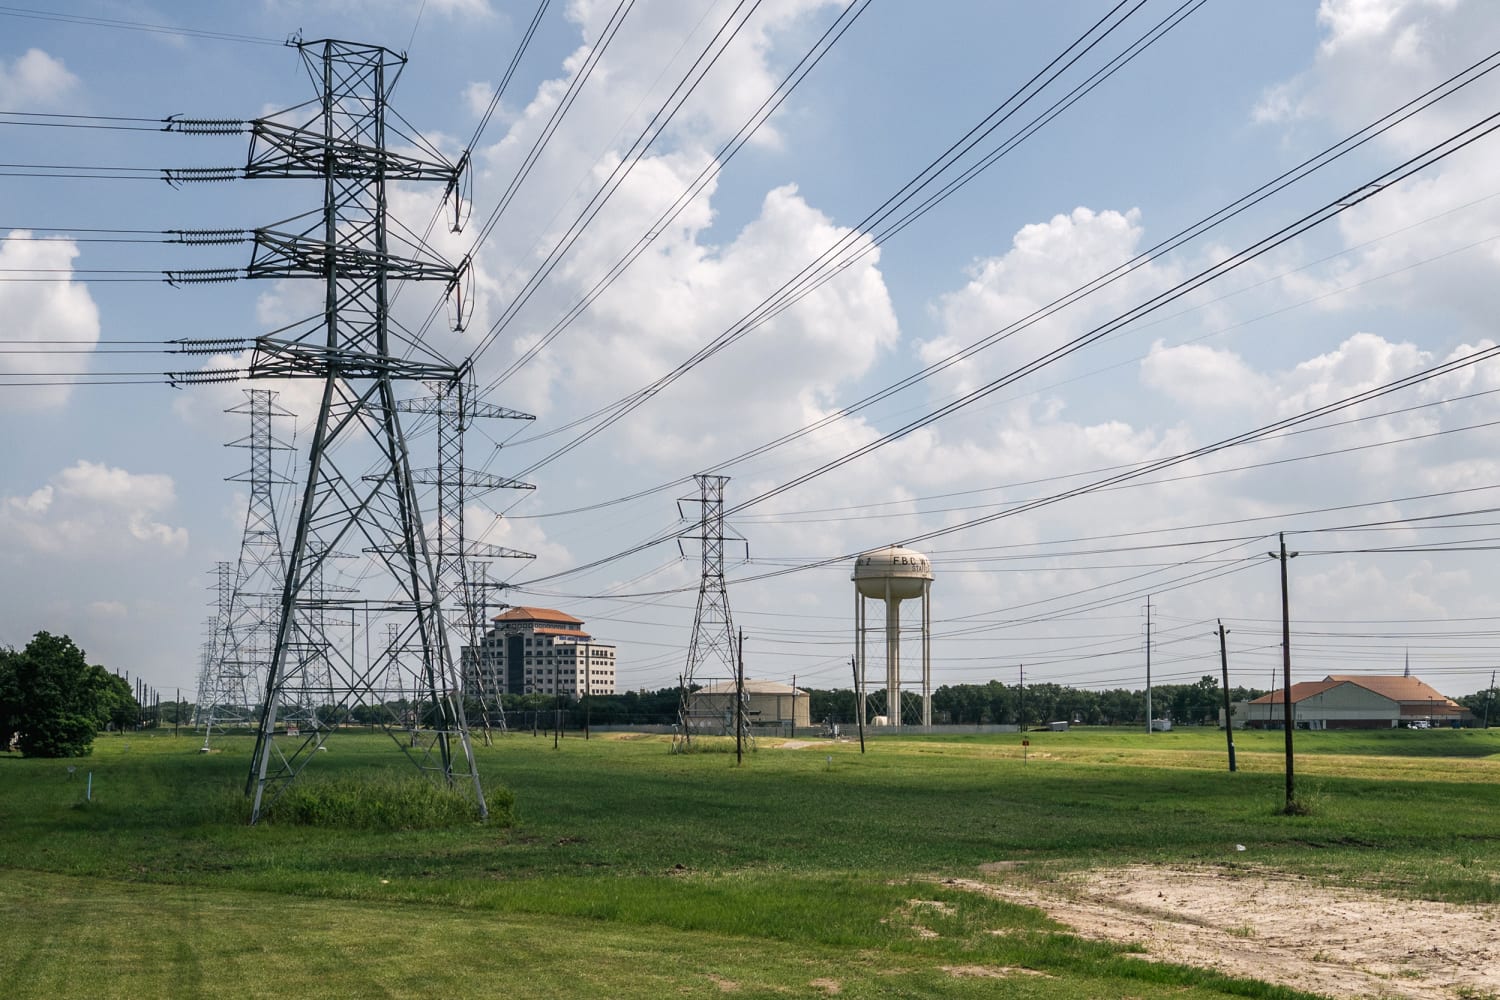 Texas power grid operator asks customers to conserve electricity after six plants go offline